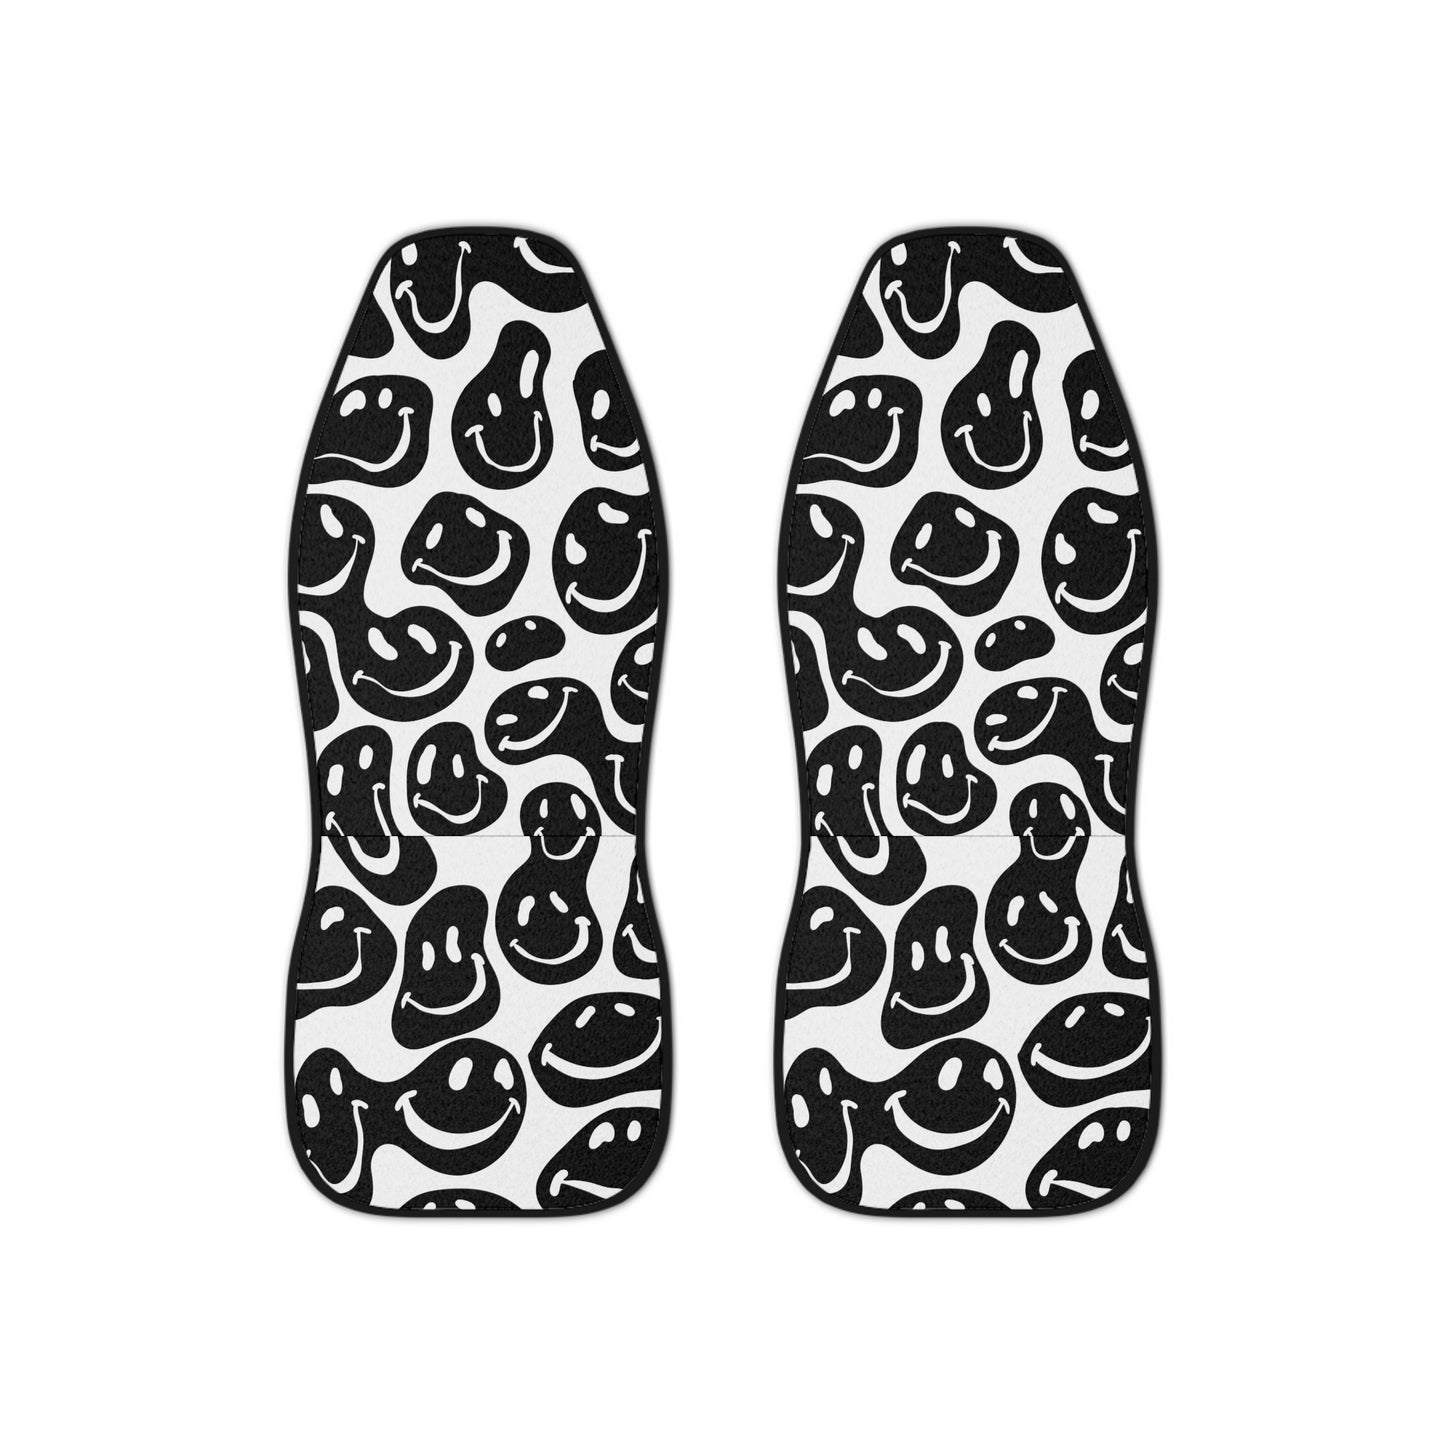 Black and White Smiles Car Seat Cover